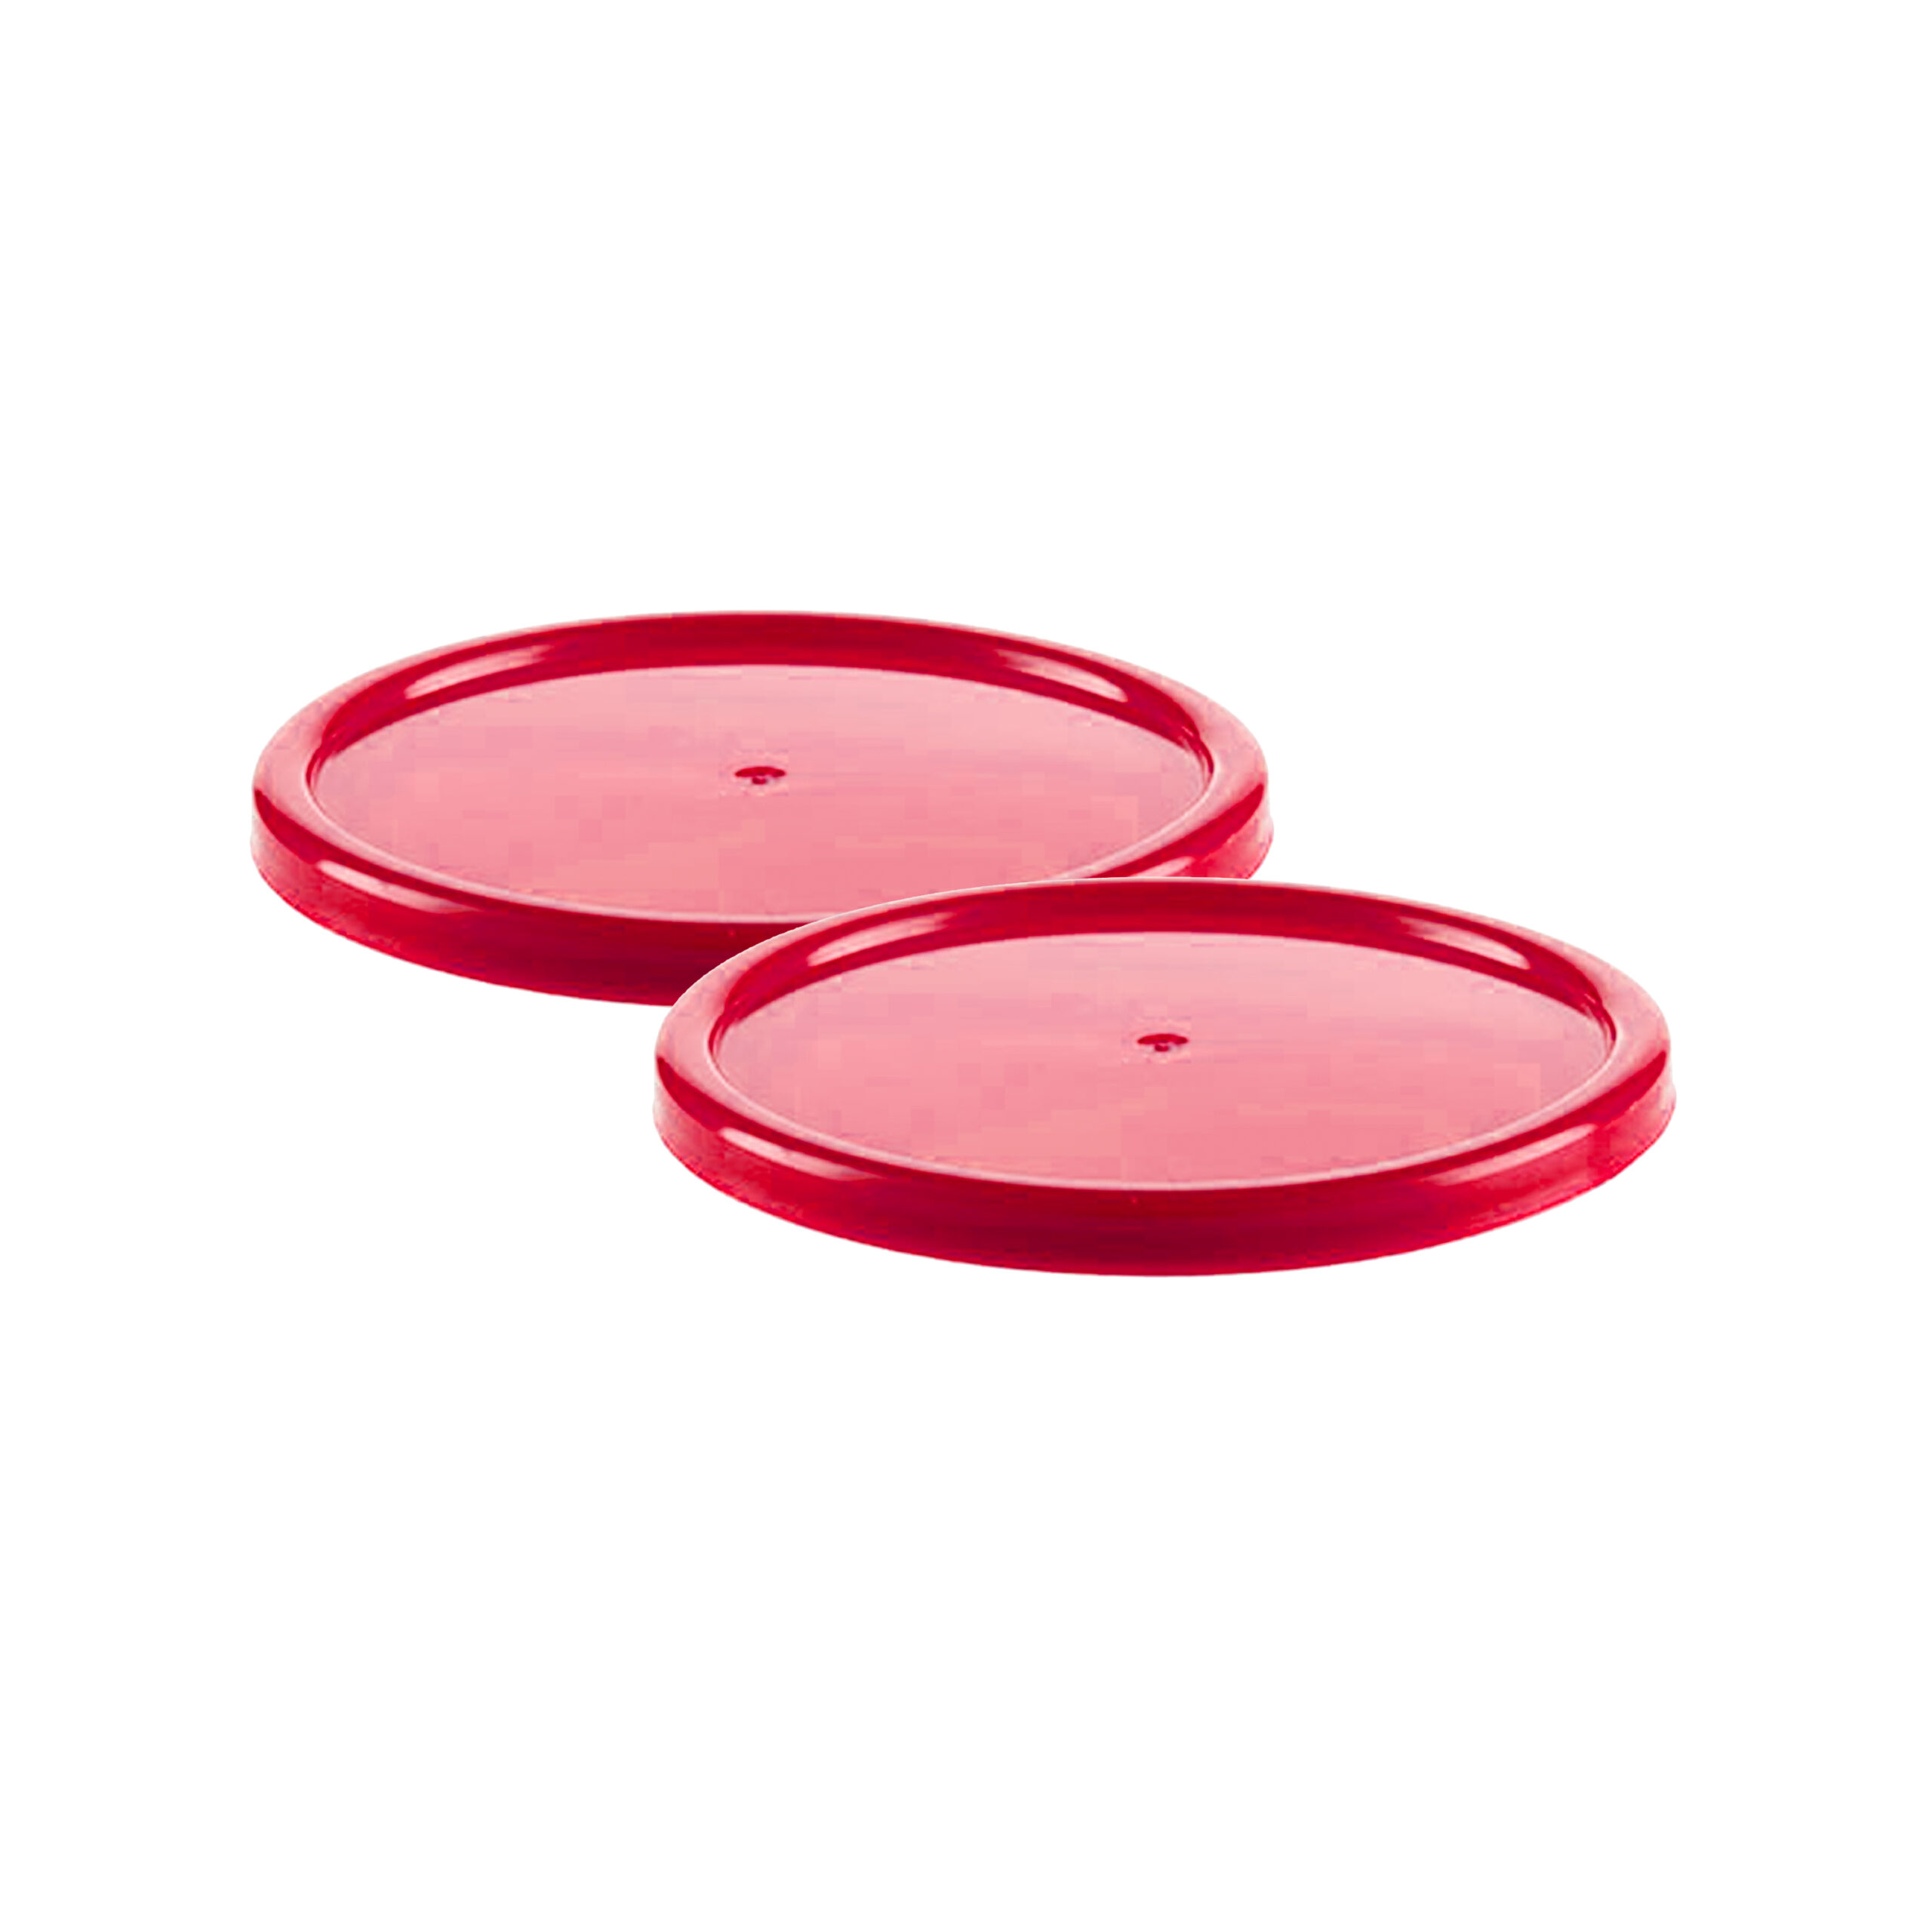 PP TUB LID RED
FOR 250/350/500
TUB (1x200)